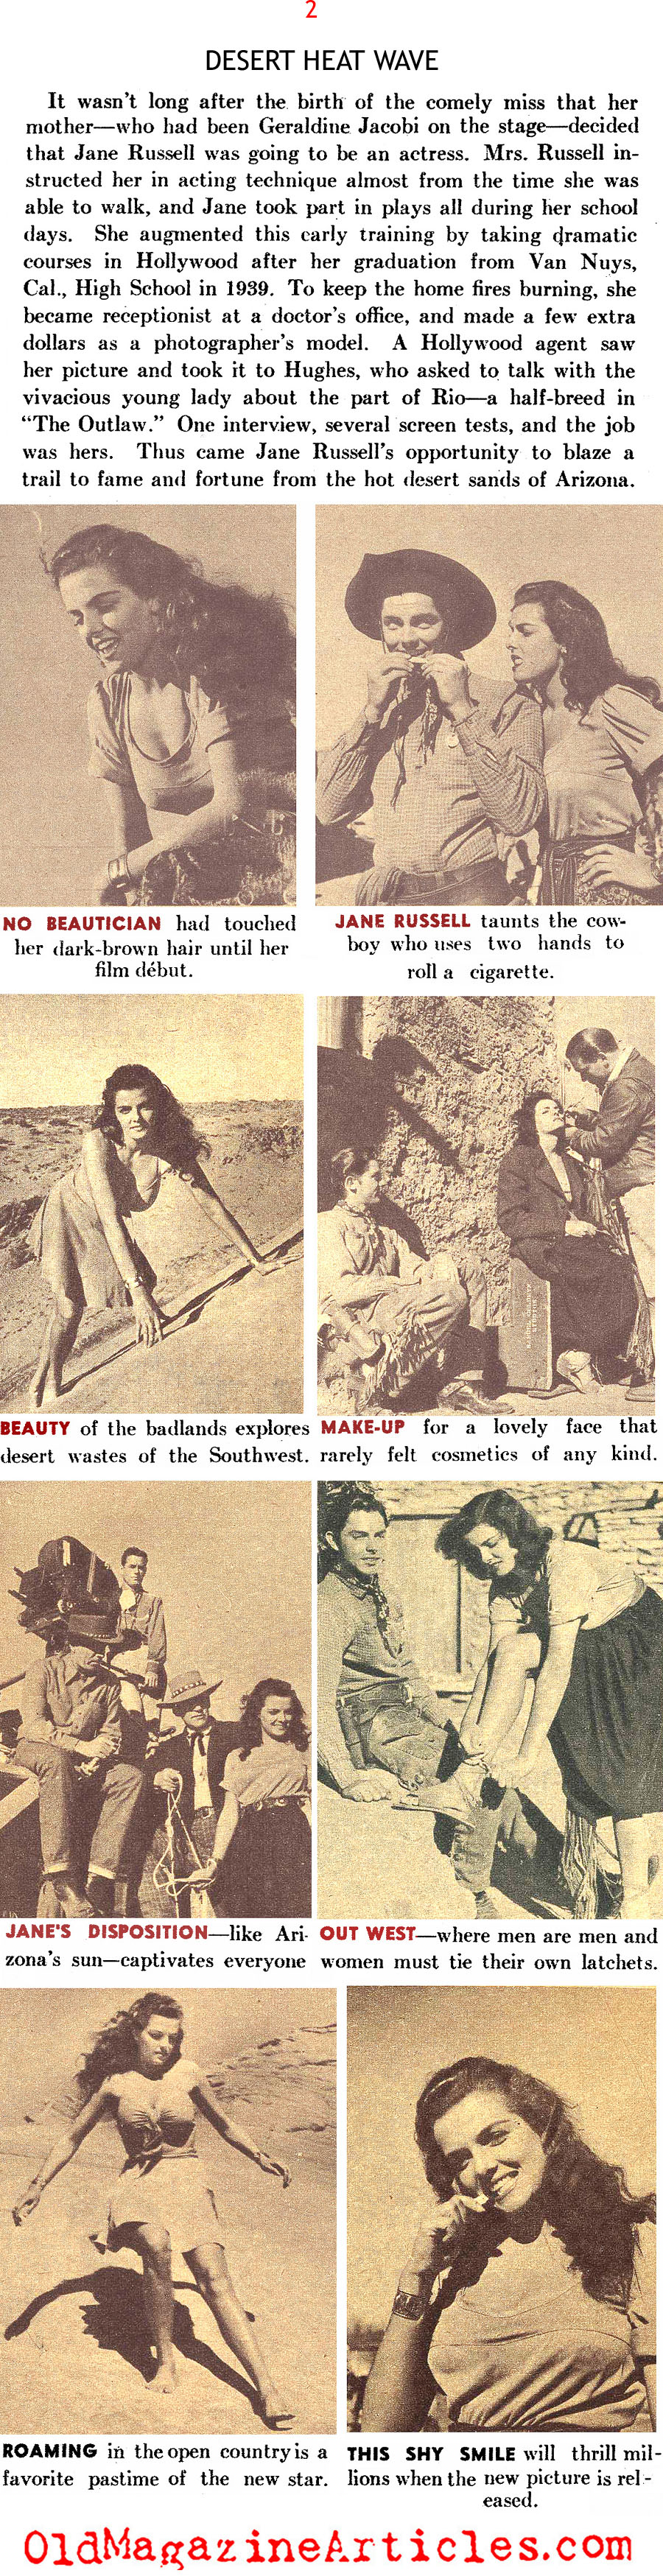 The Star of THE OUTLAW (Pic Magazine, 1941)